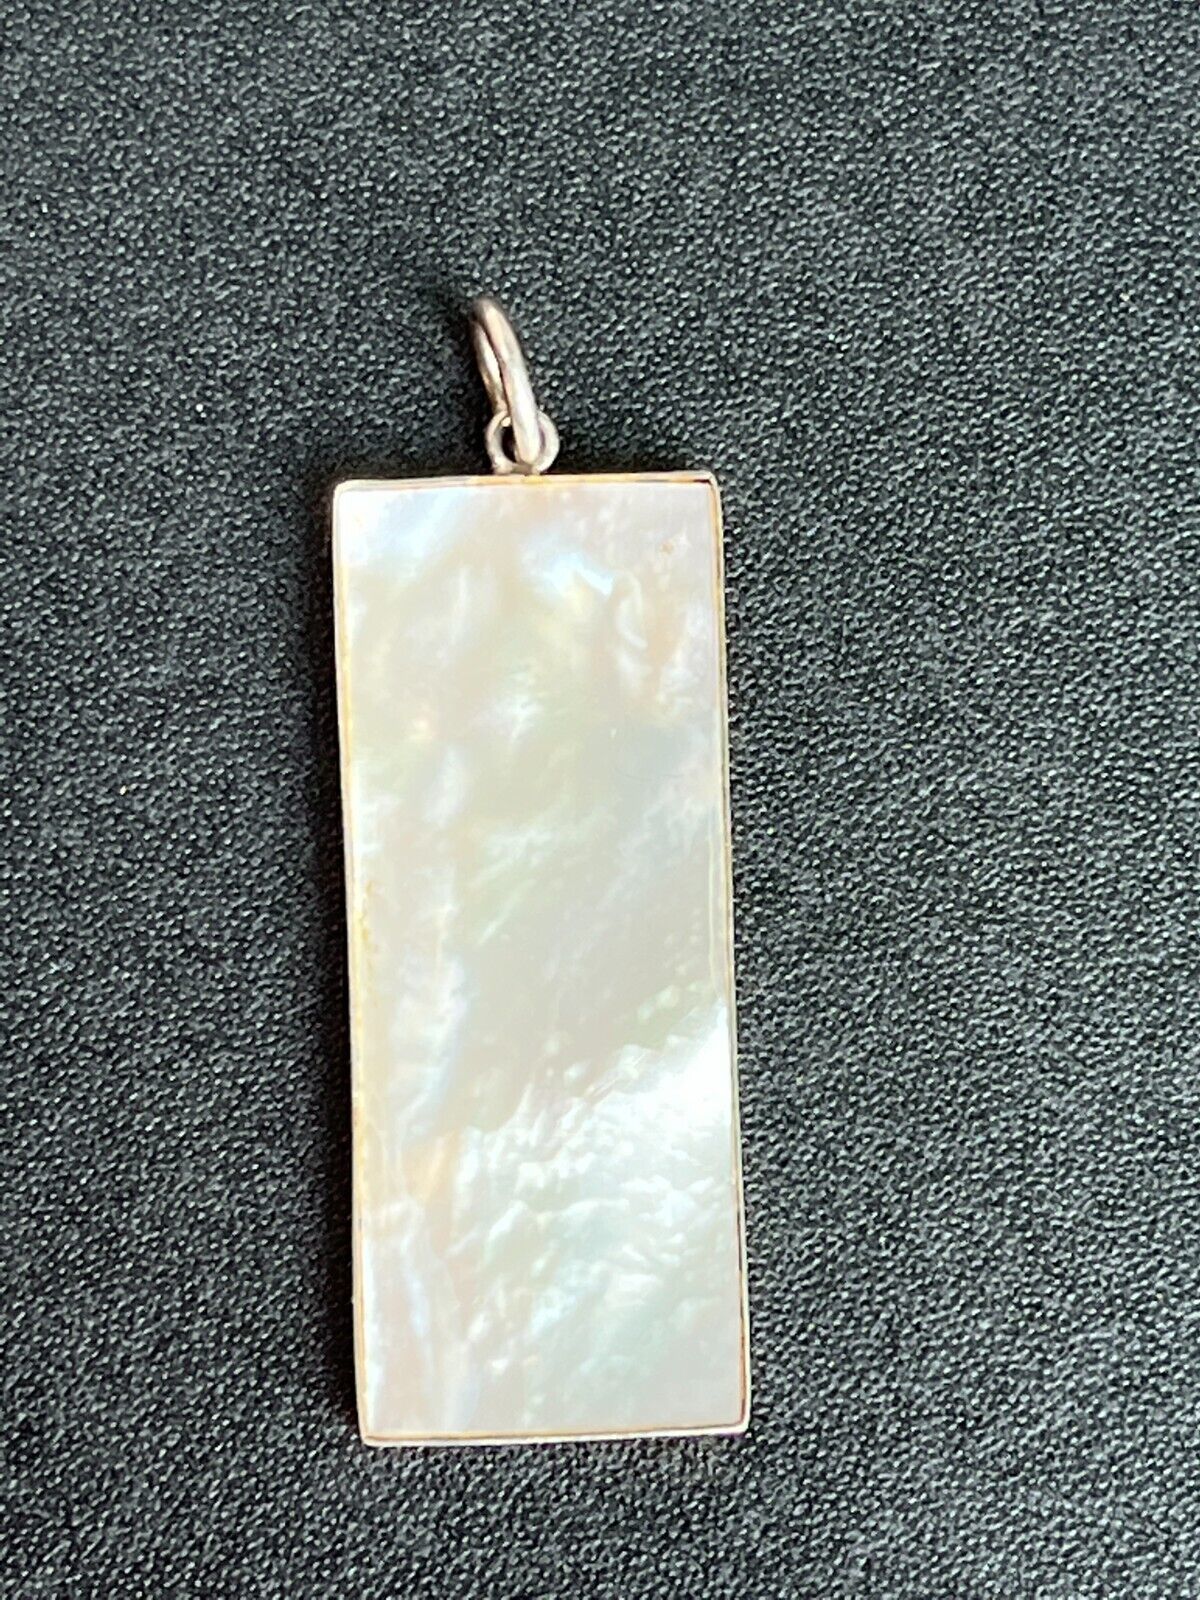 Primary image for Estate Double Sided Thin Mother of Pearl Rectangle in Nonmagnetic Silver Frame 